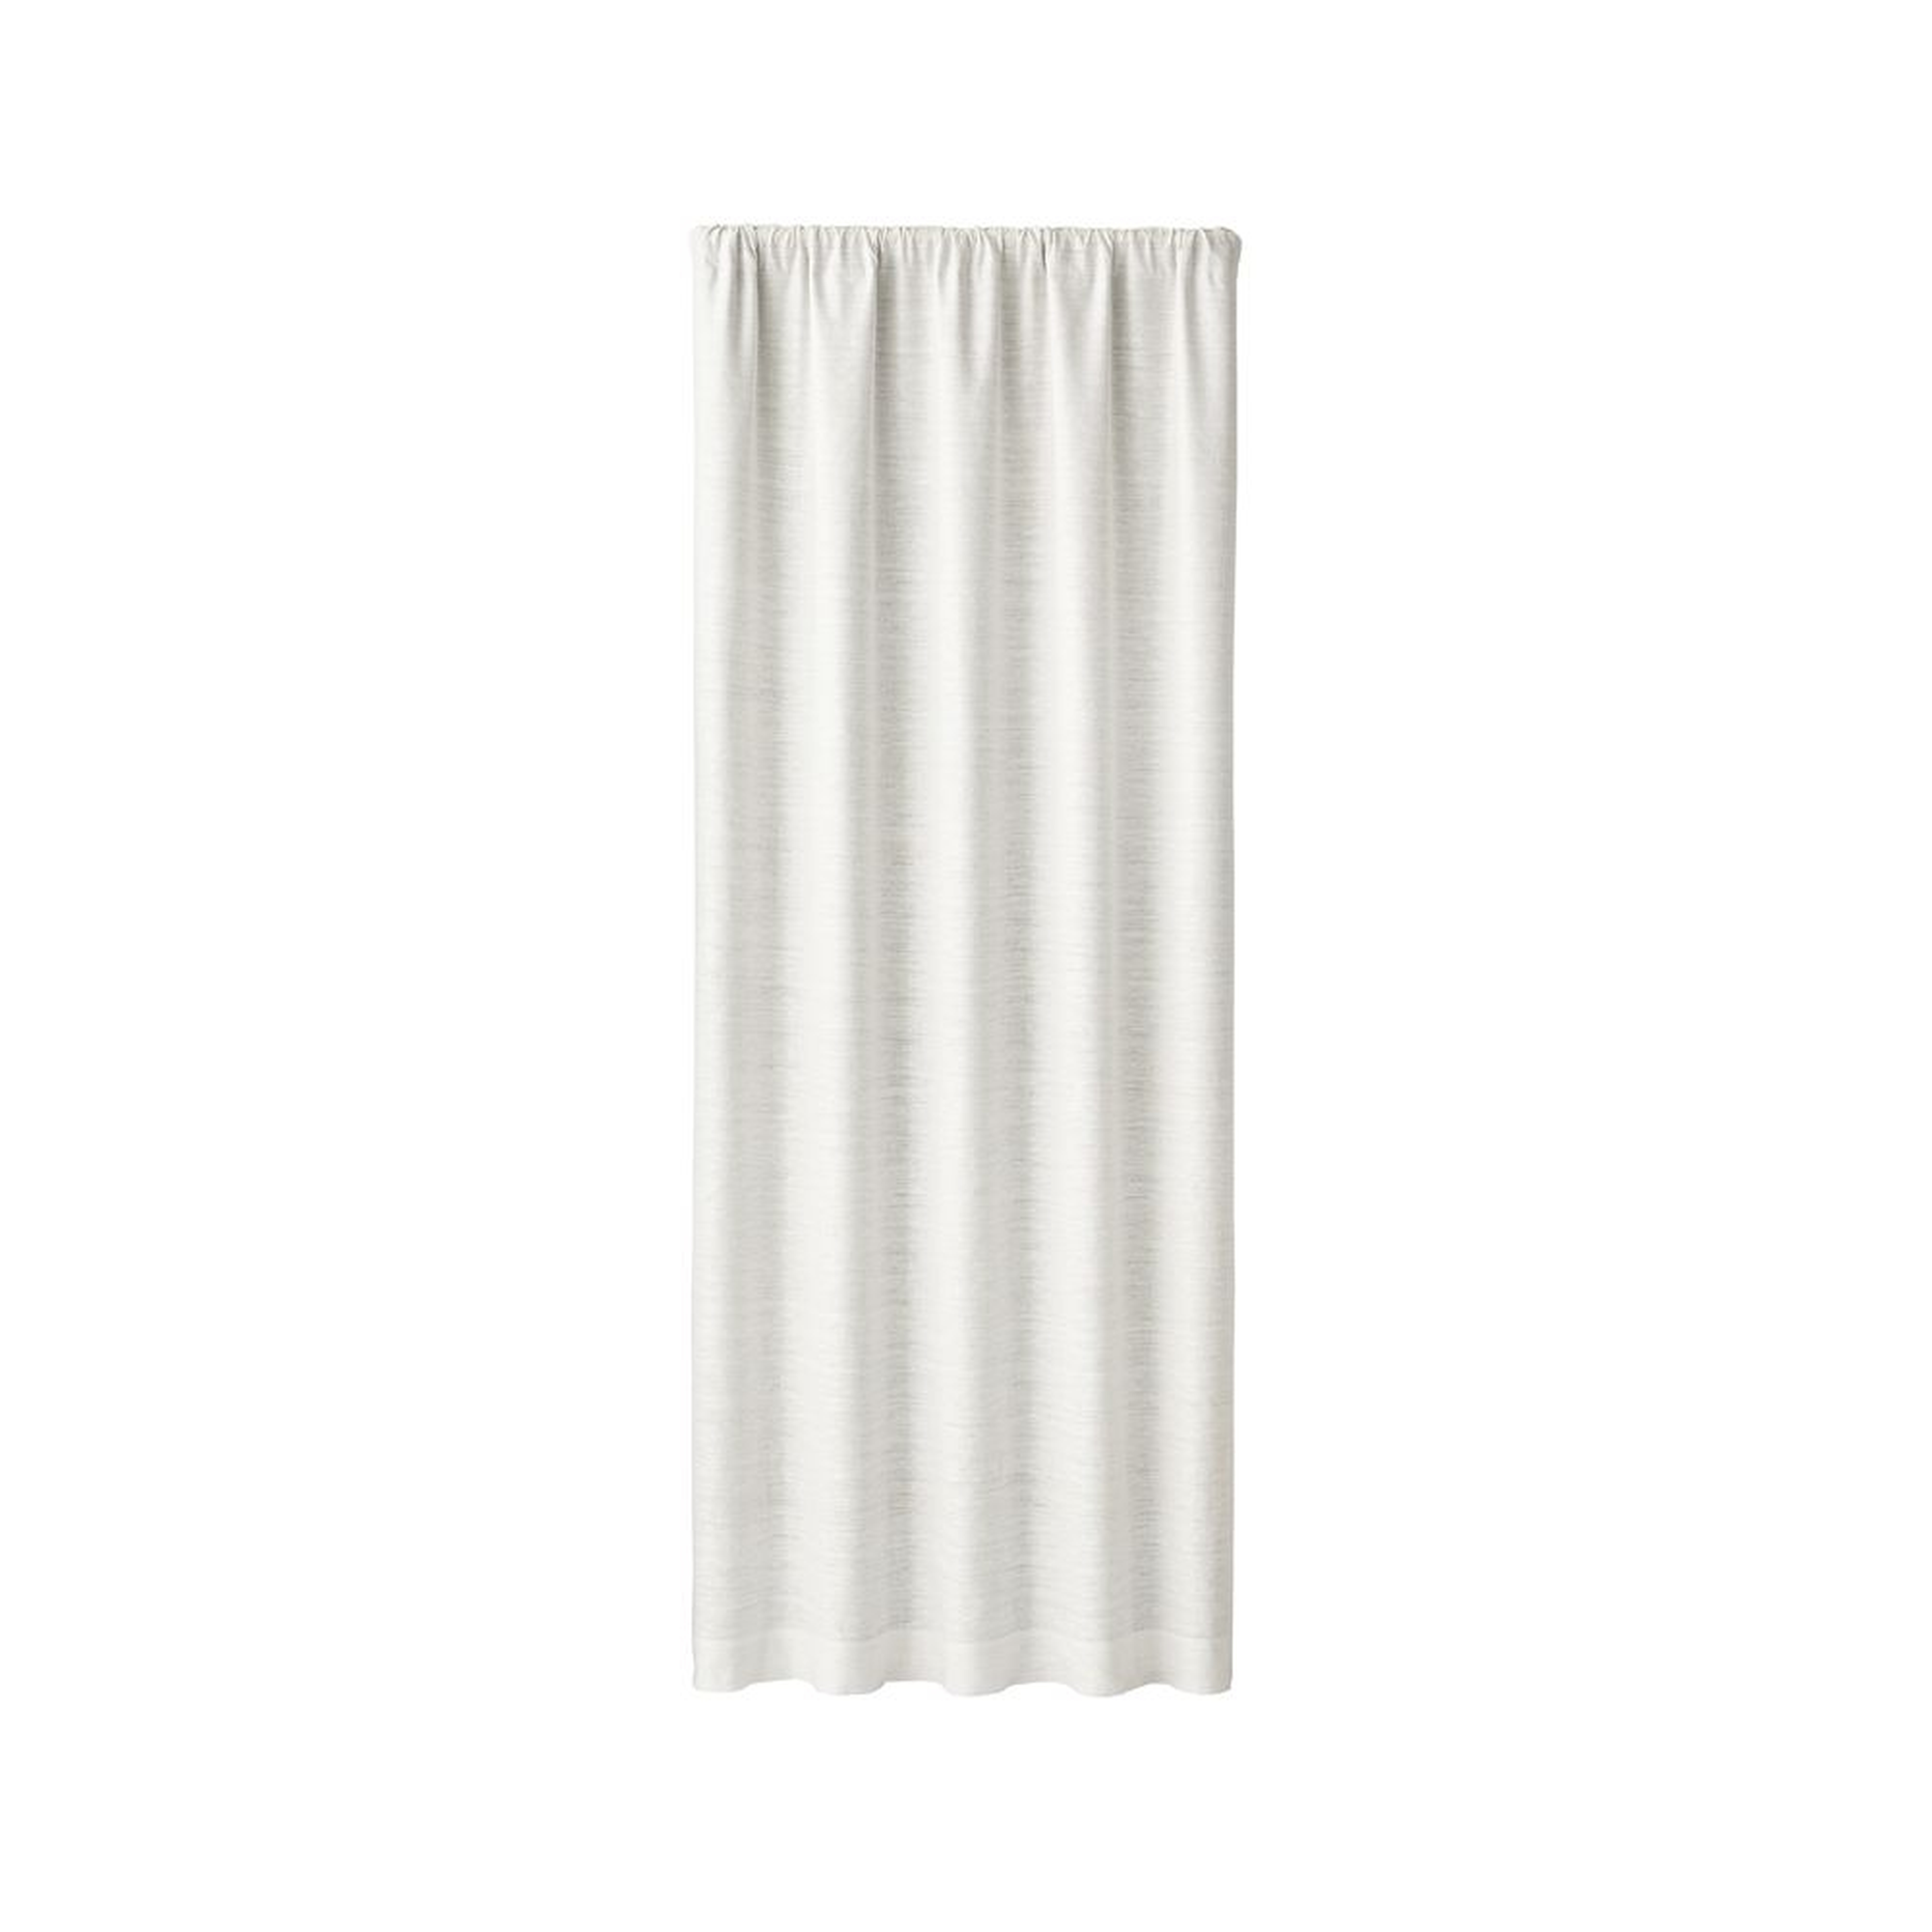 Silvana Ivory Silk Blackout Curtain Panel 48"x96" - Crate and Barrel